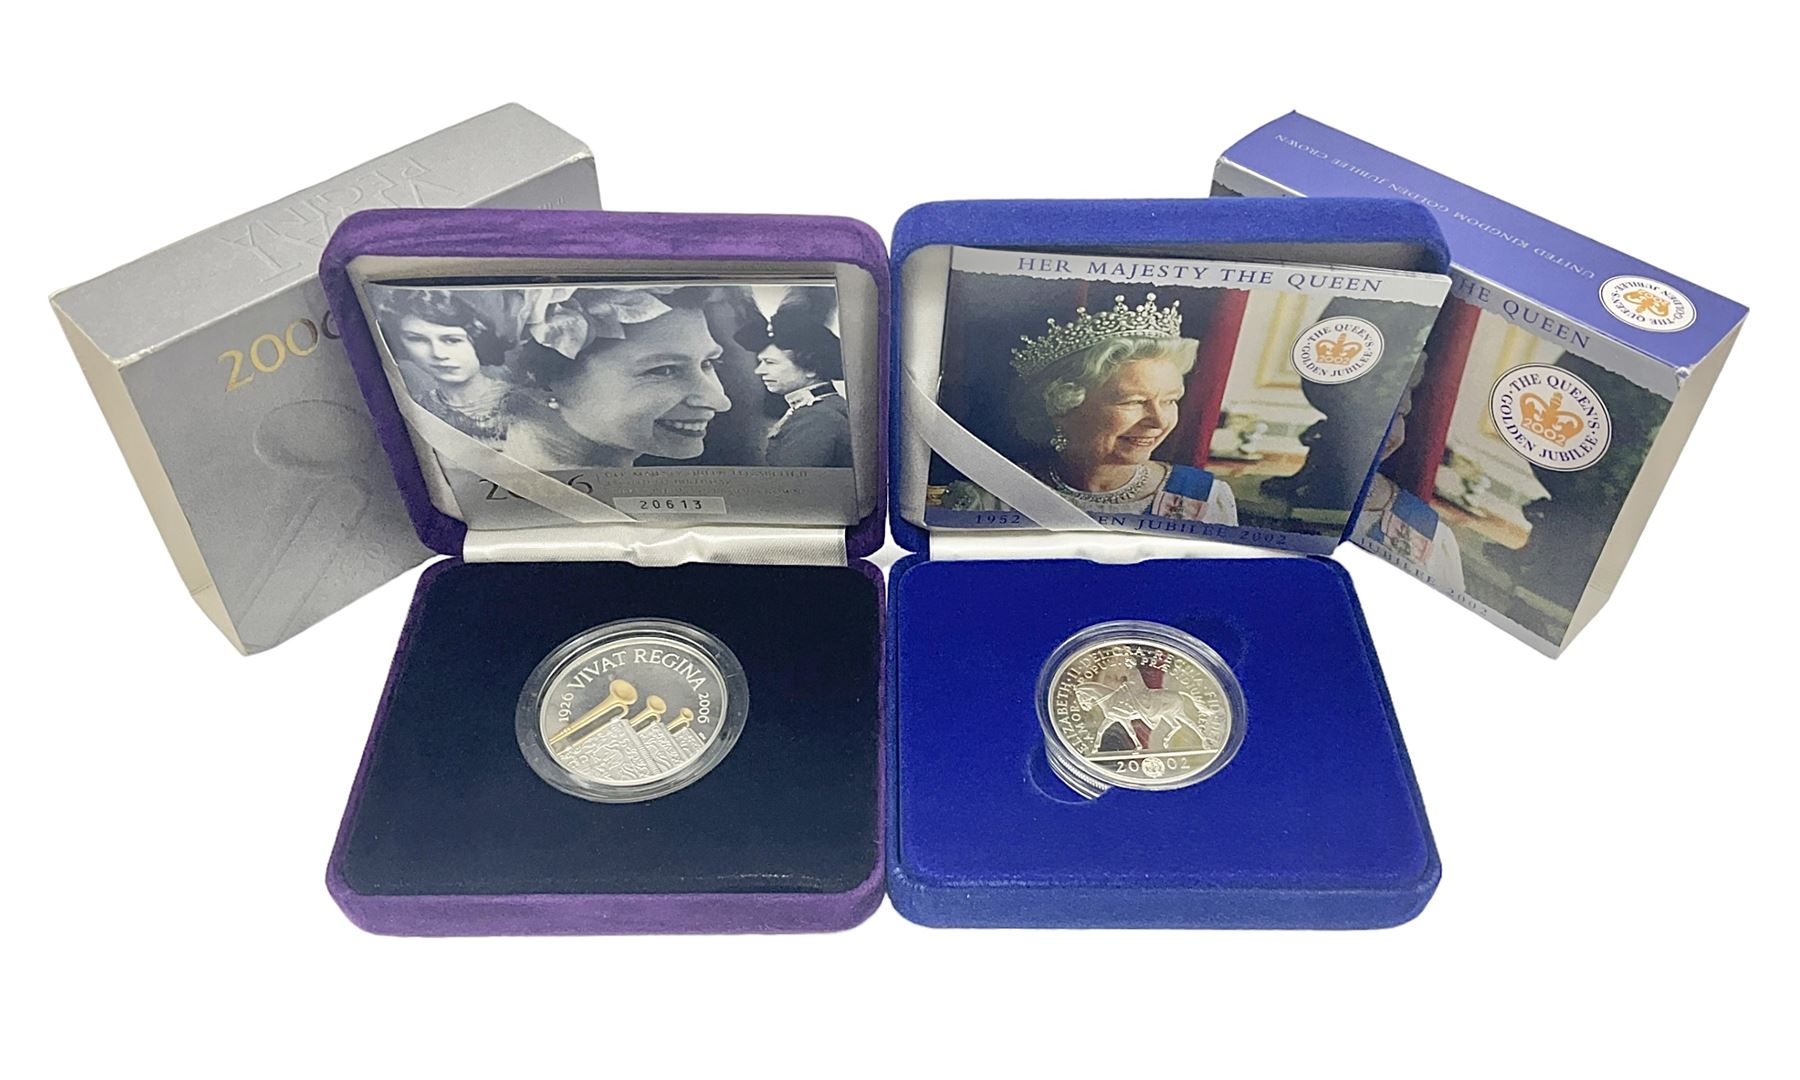 The Royal Mint United Kingdom 2002 'Golden Jubilee' silver proof crown and 2006 'Her Majesty Queen E